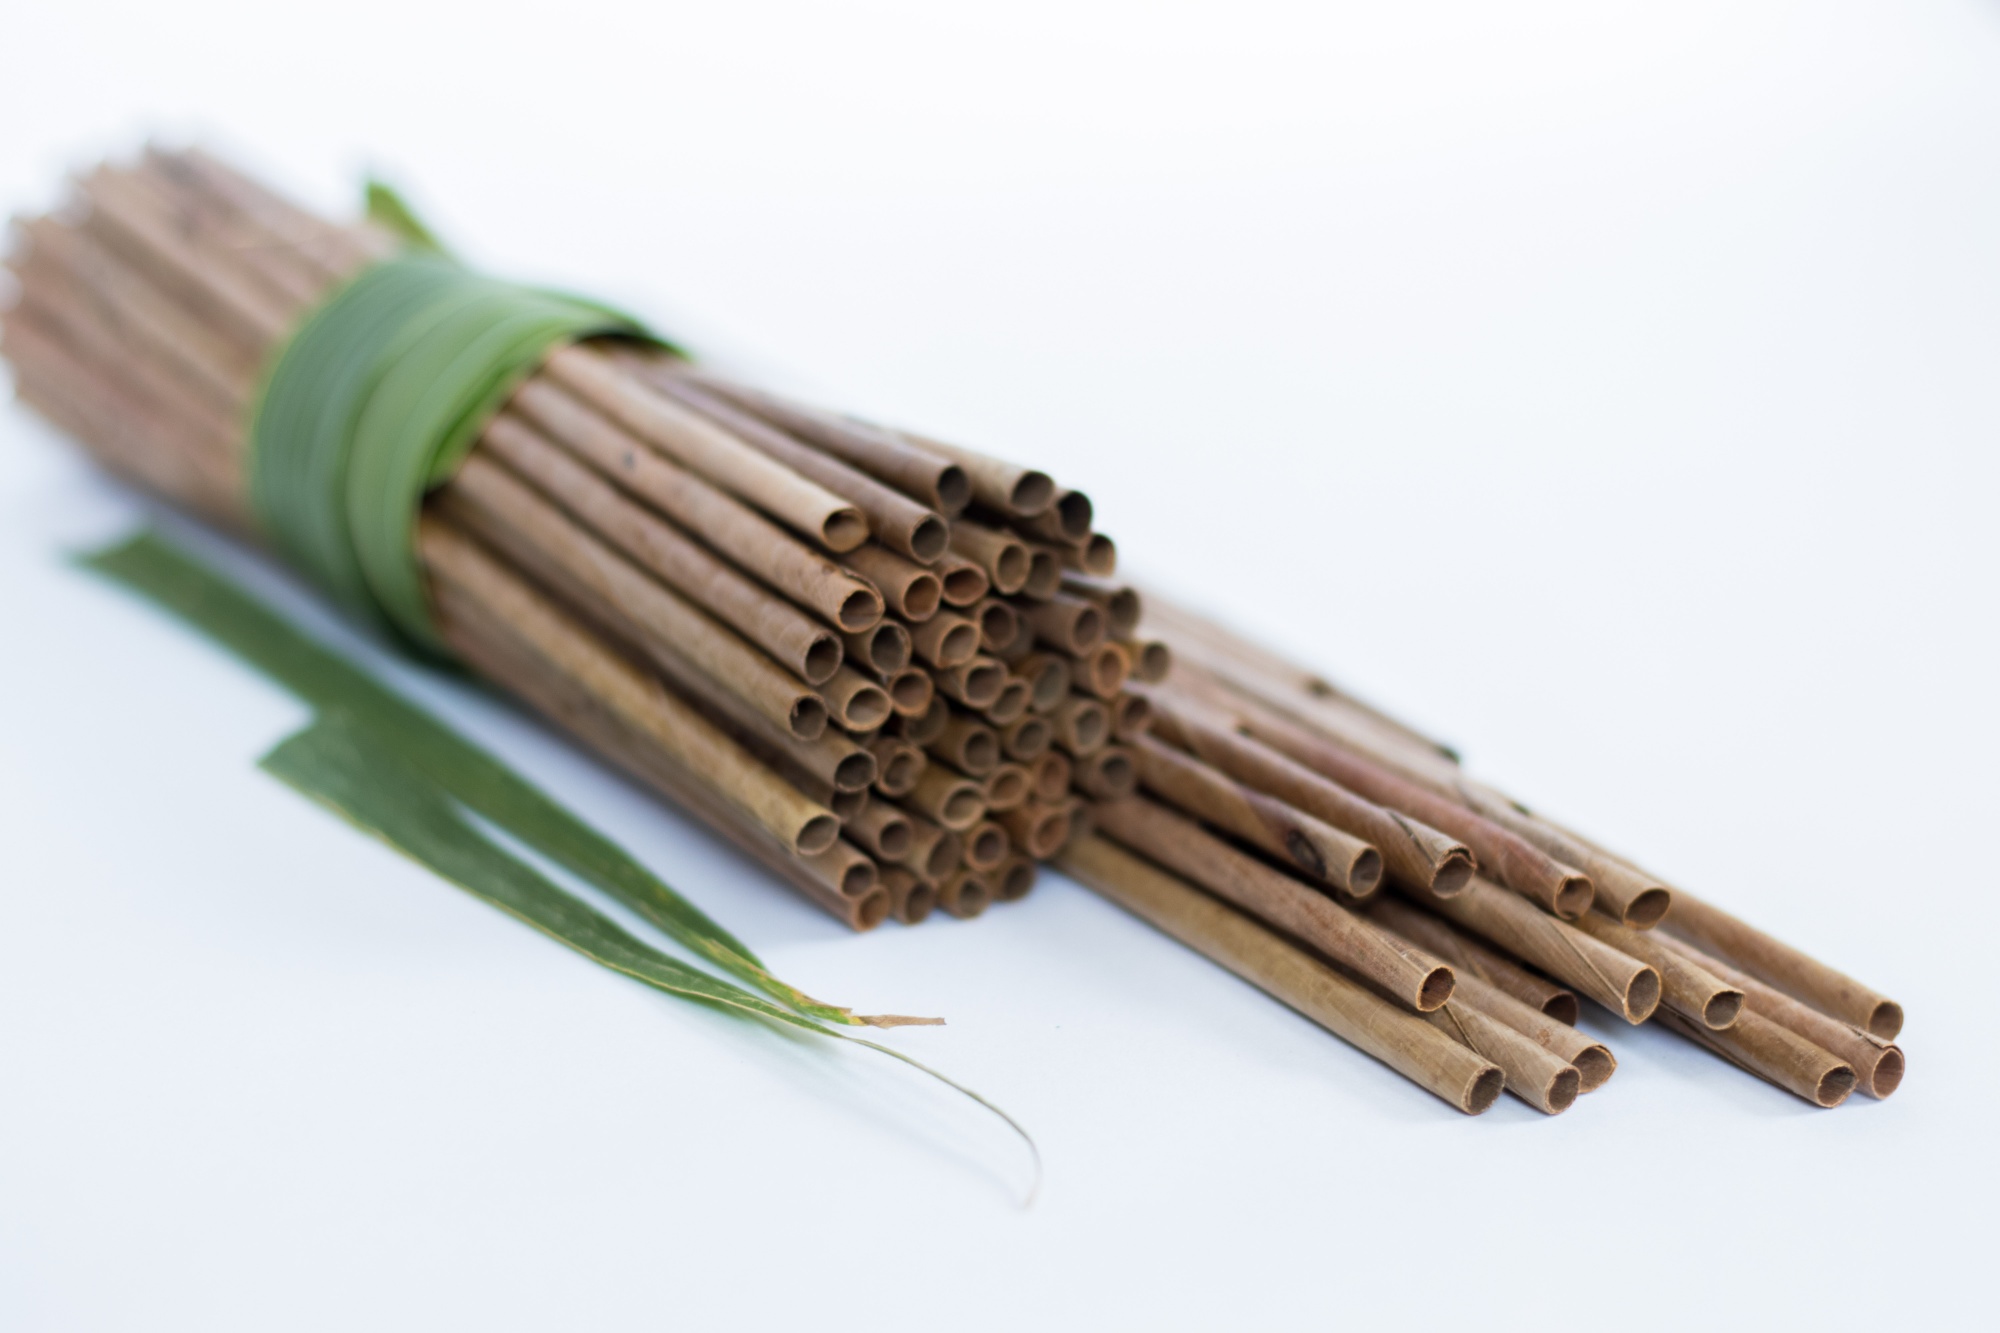 Straws made from coconut palm leaves.